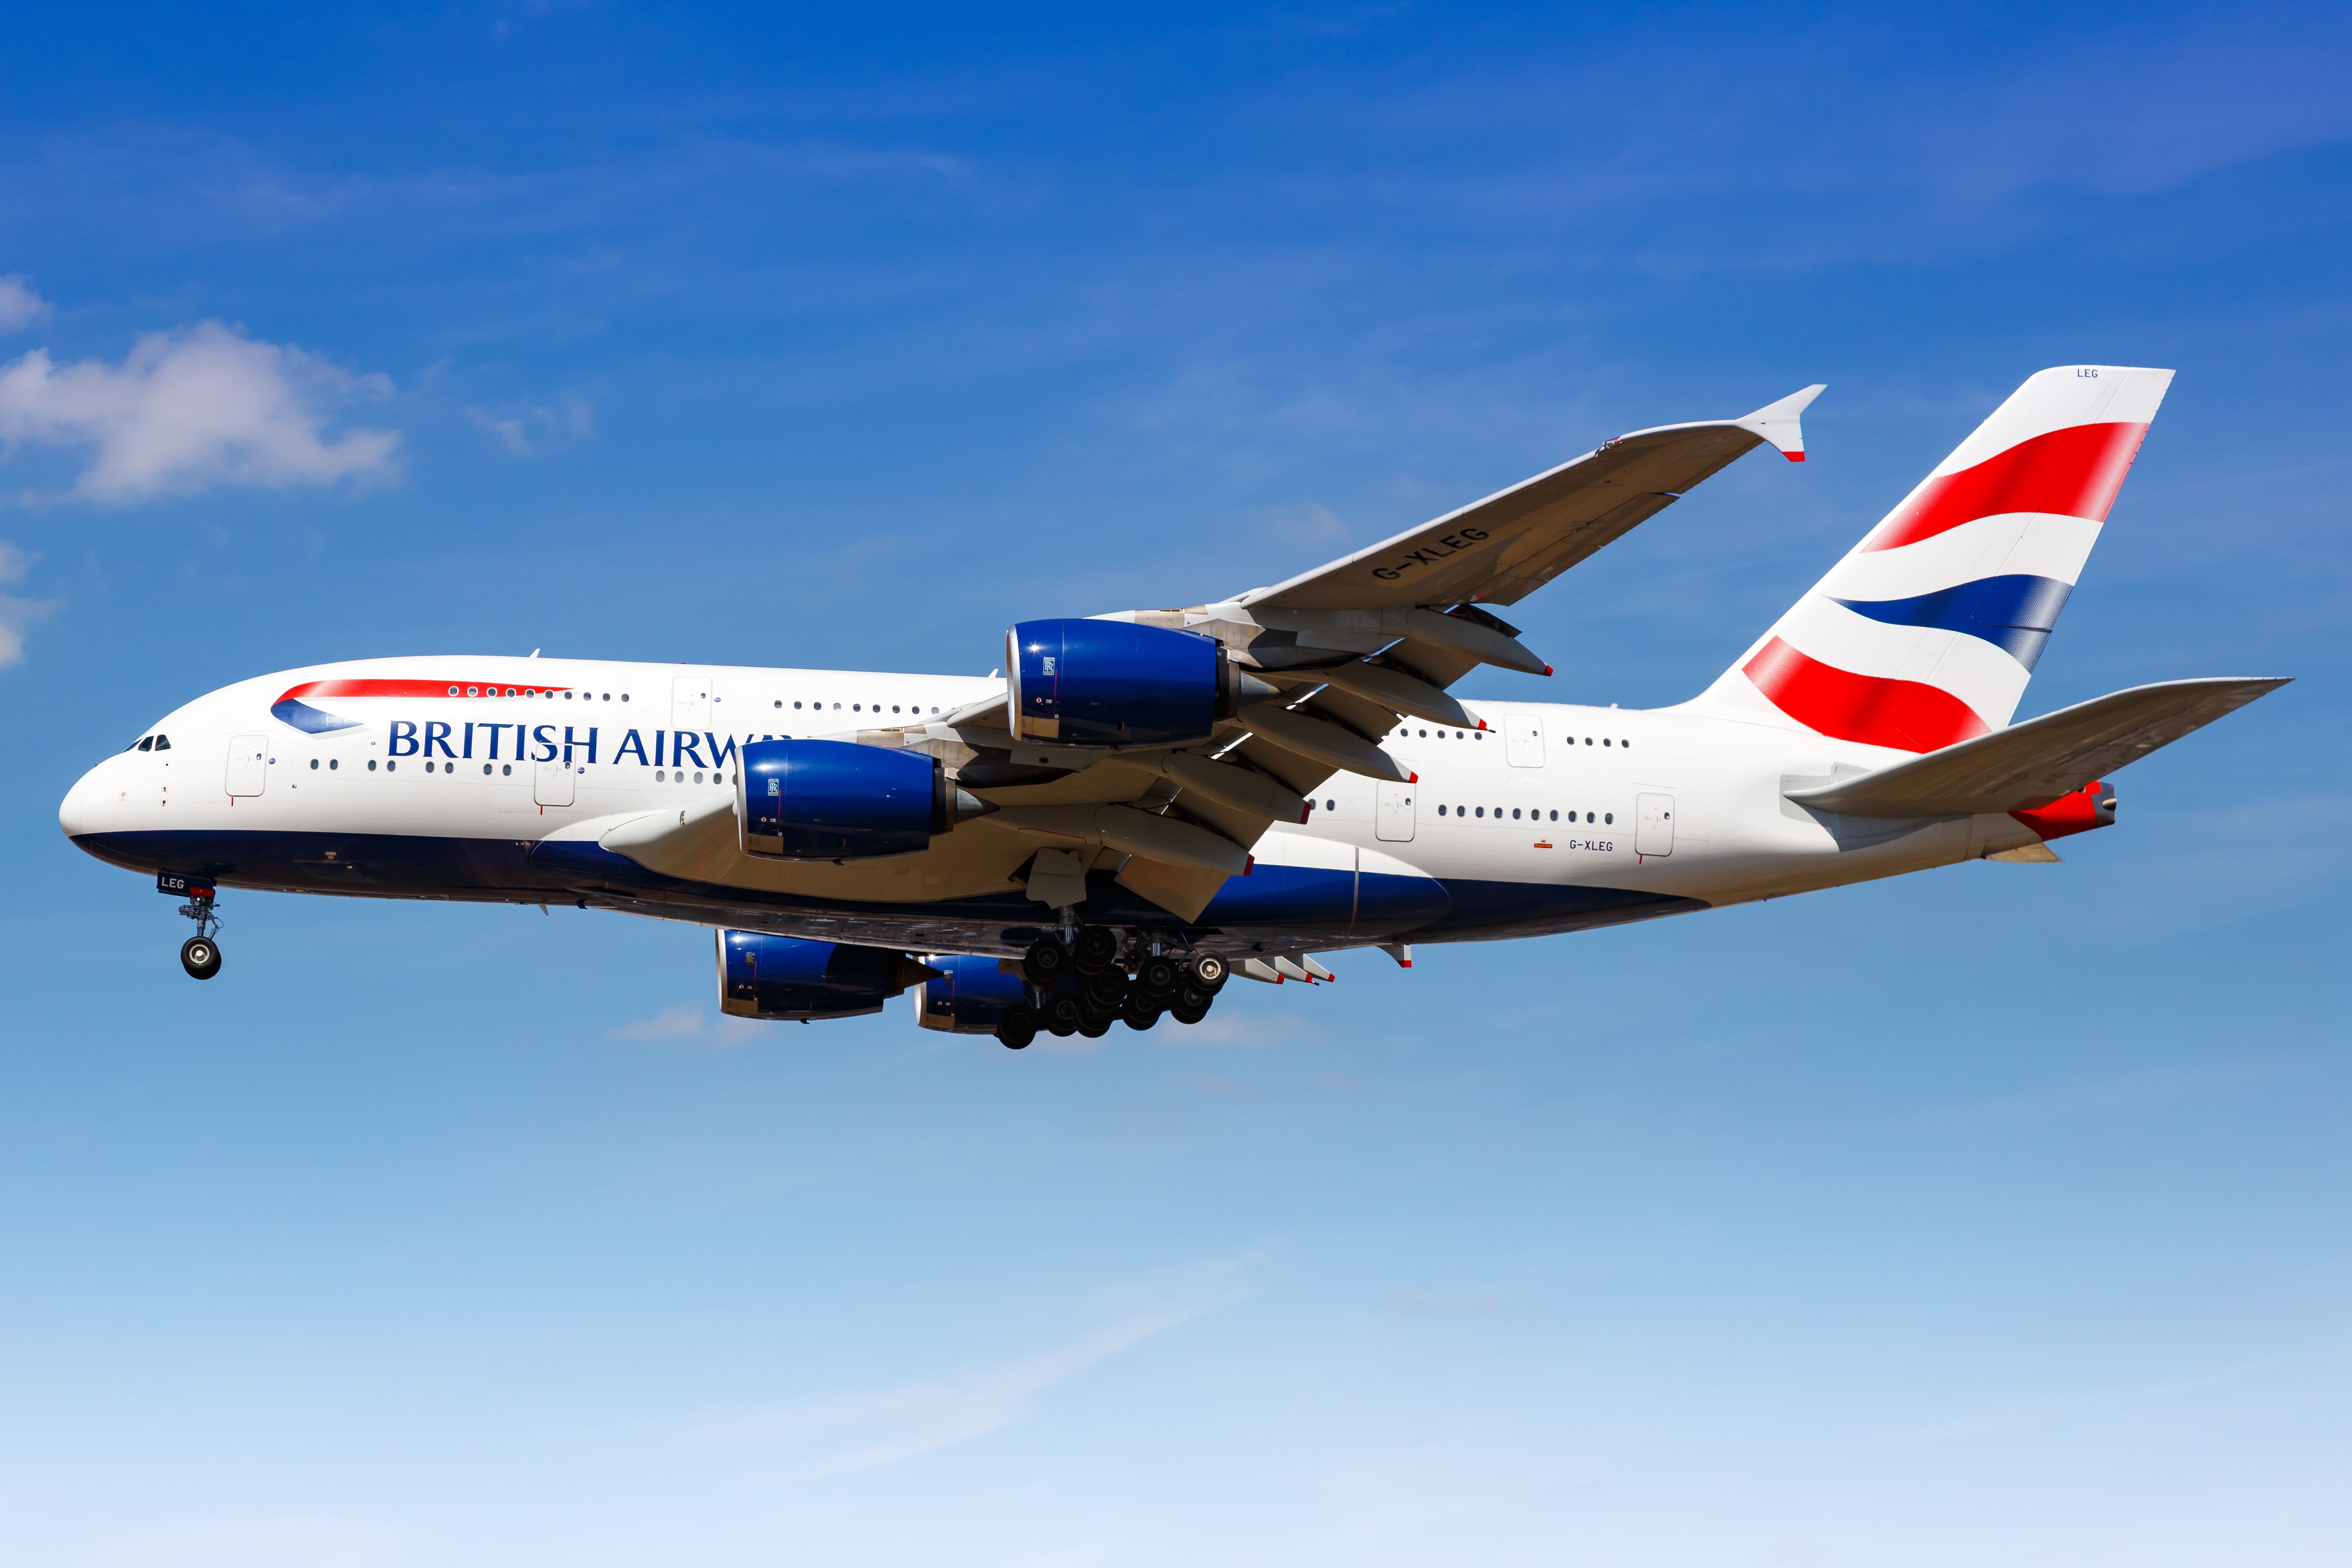 A British Airways Airbus A380 flying in the sky.